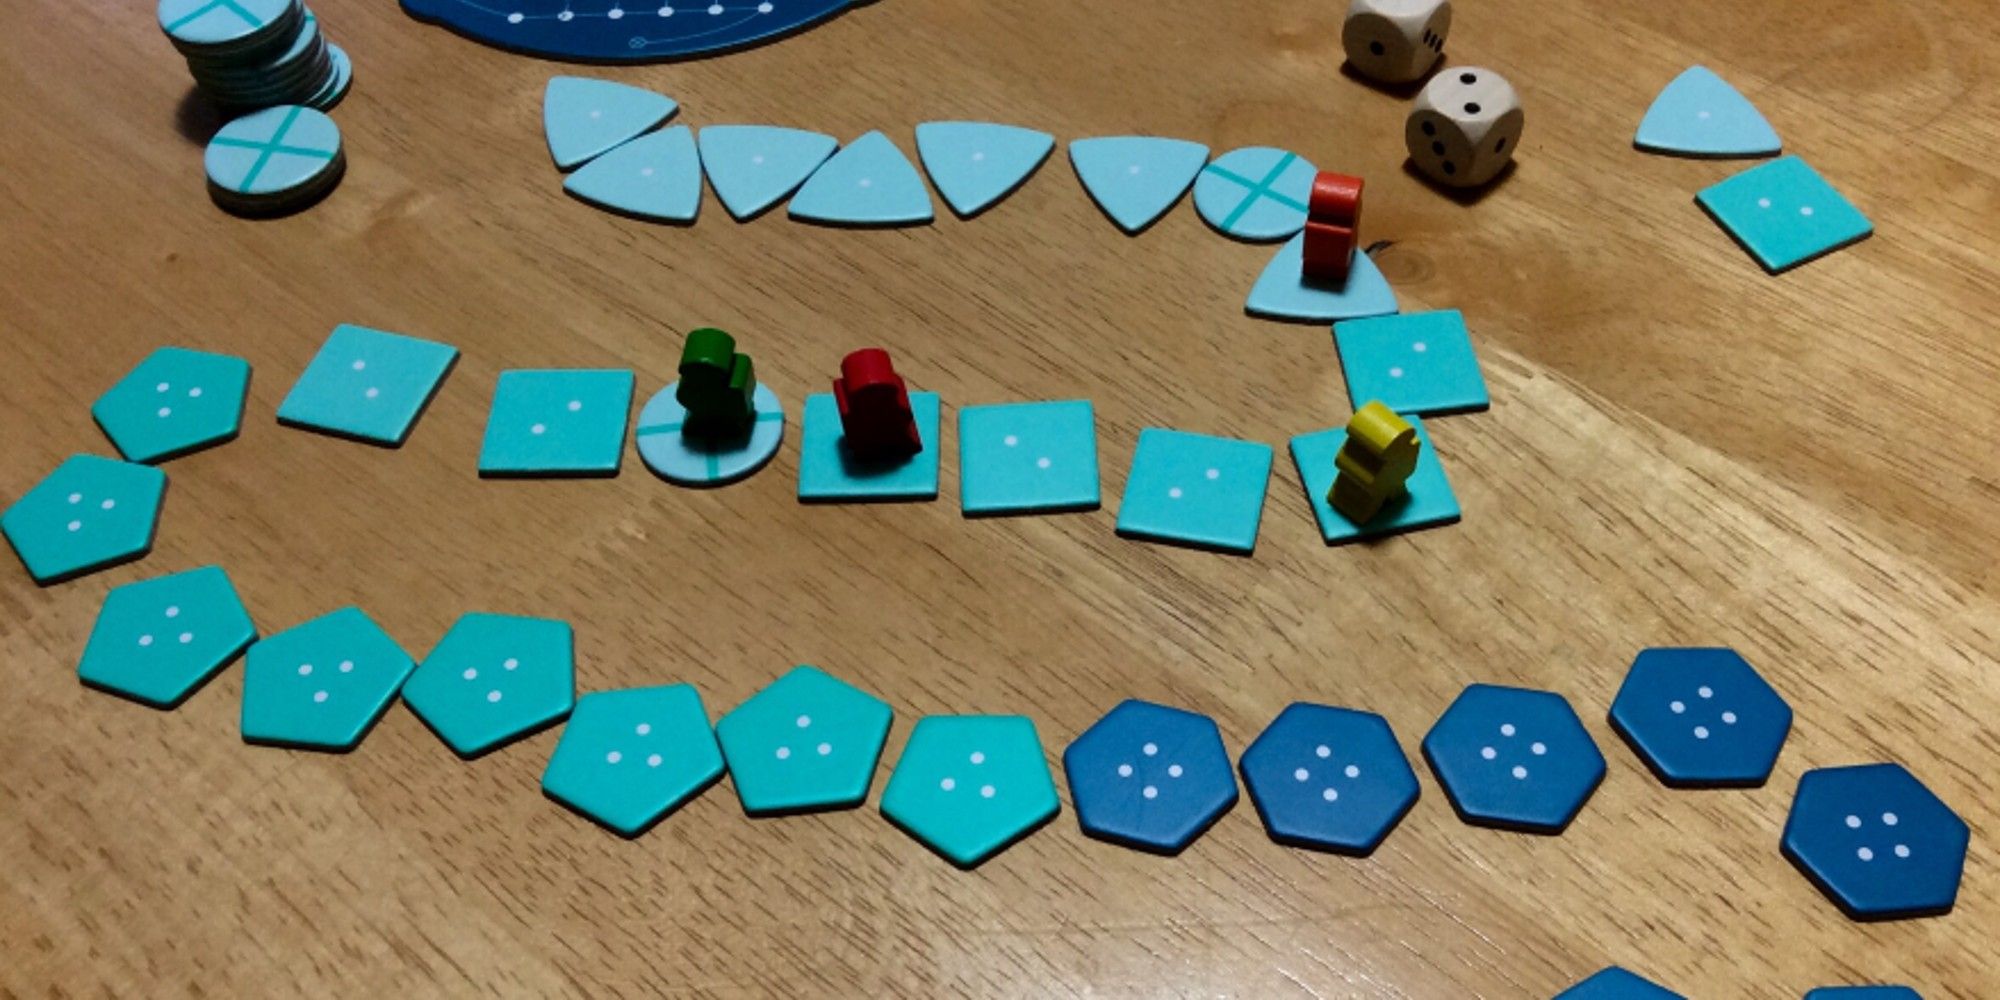 Deep Sea Adventure Board Game Pieces on wooden table